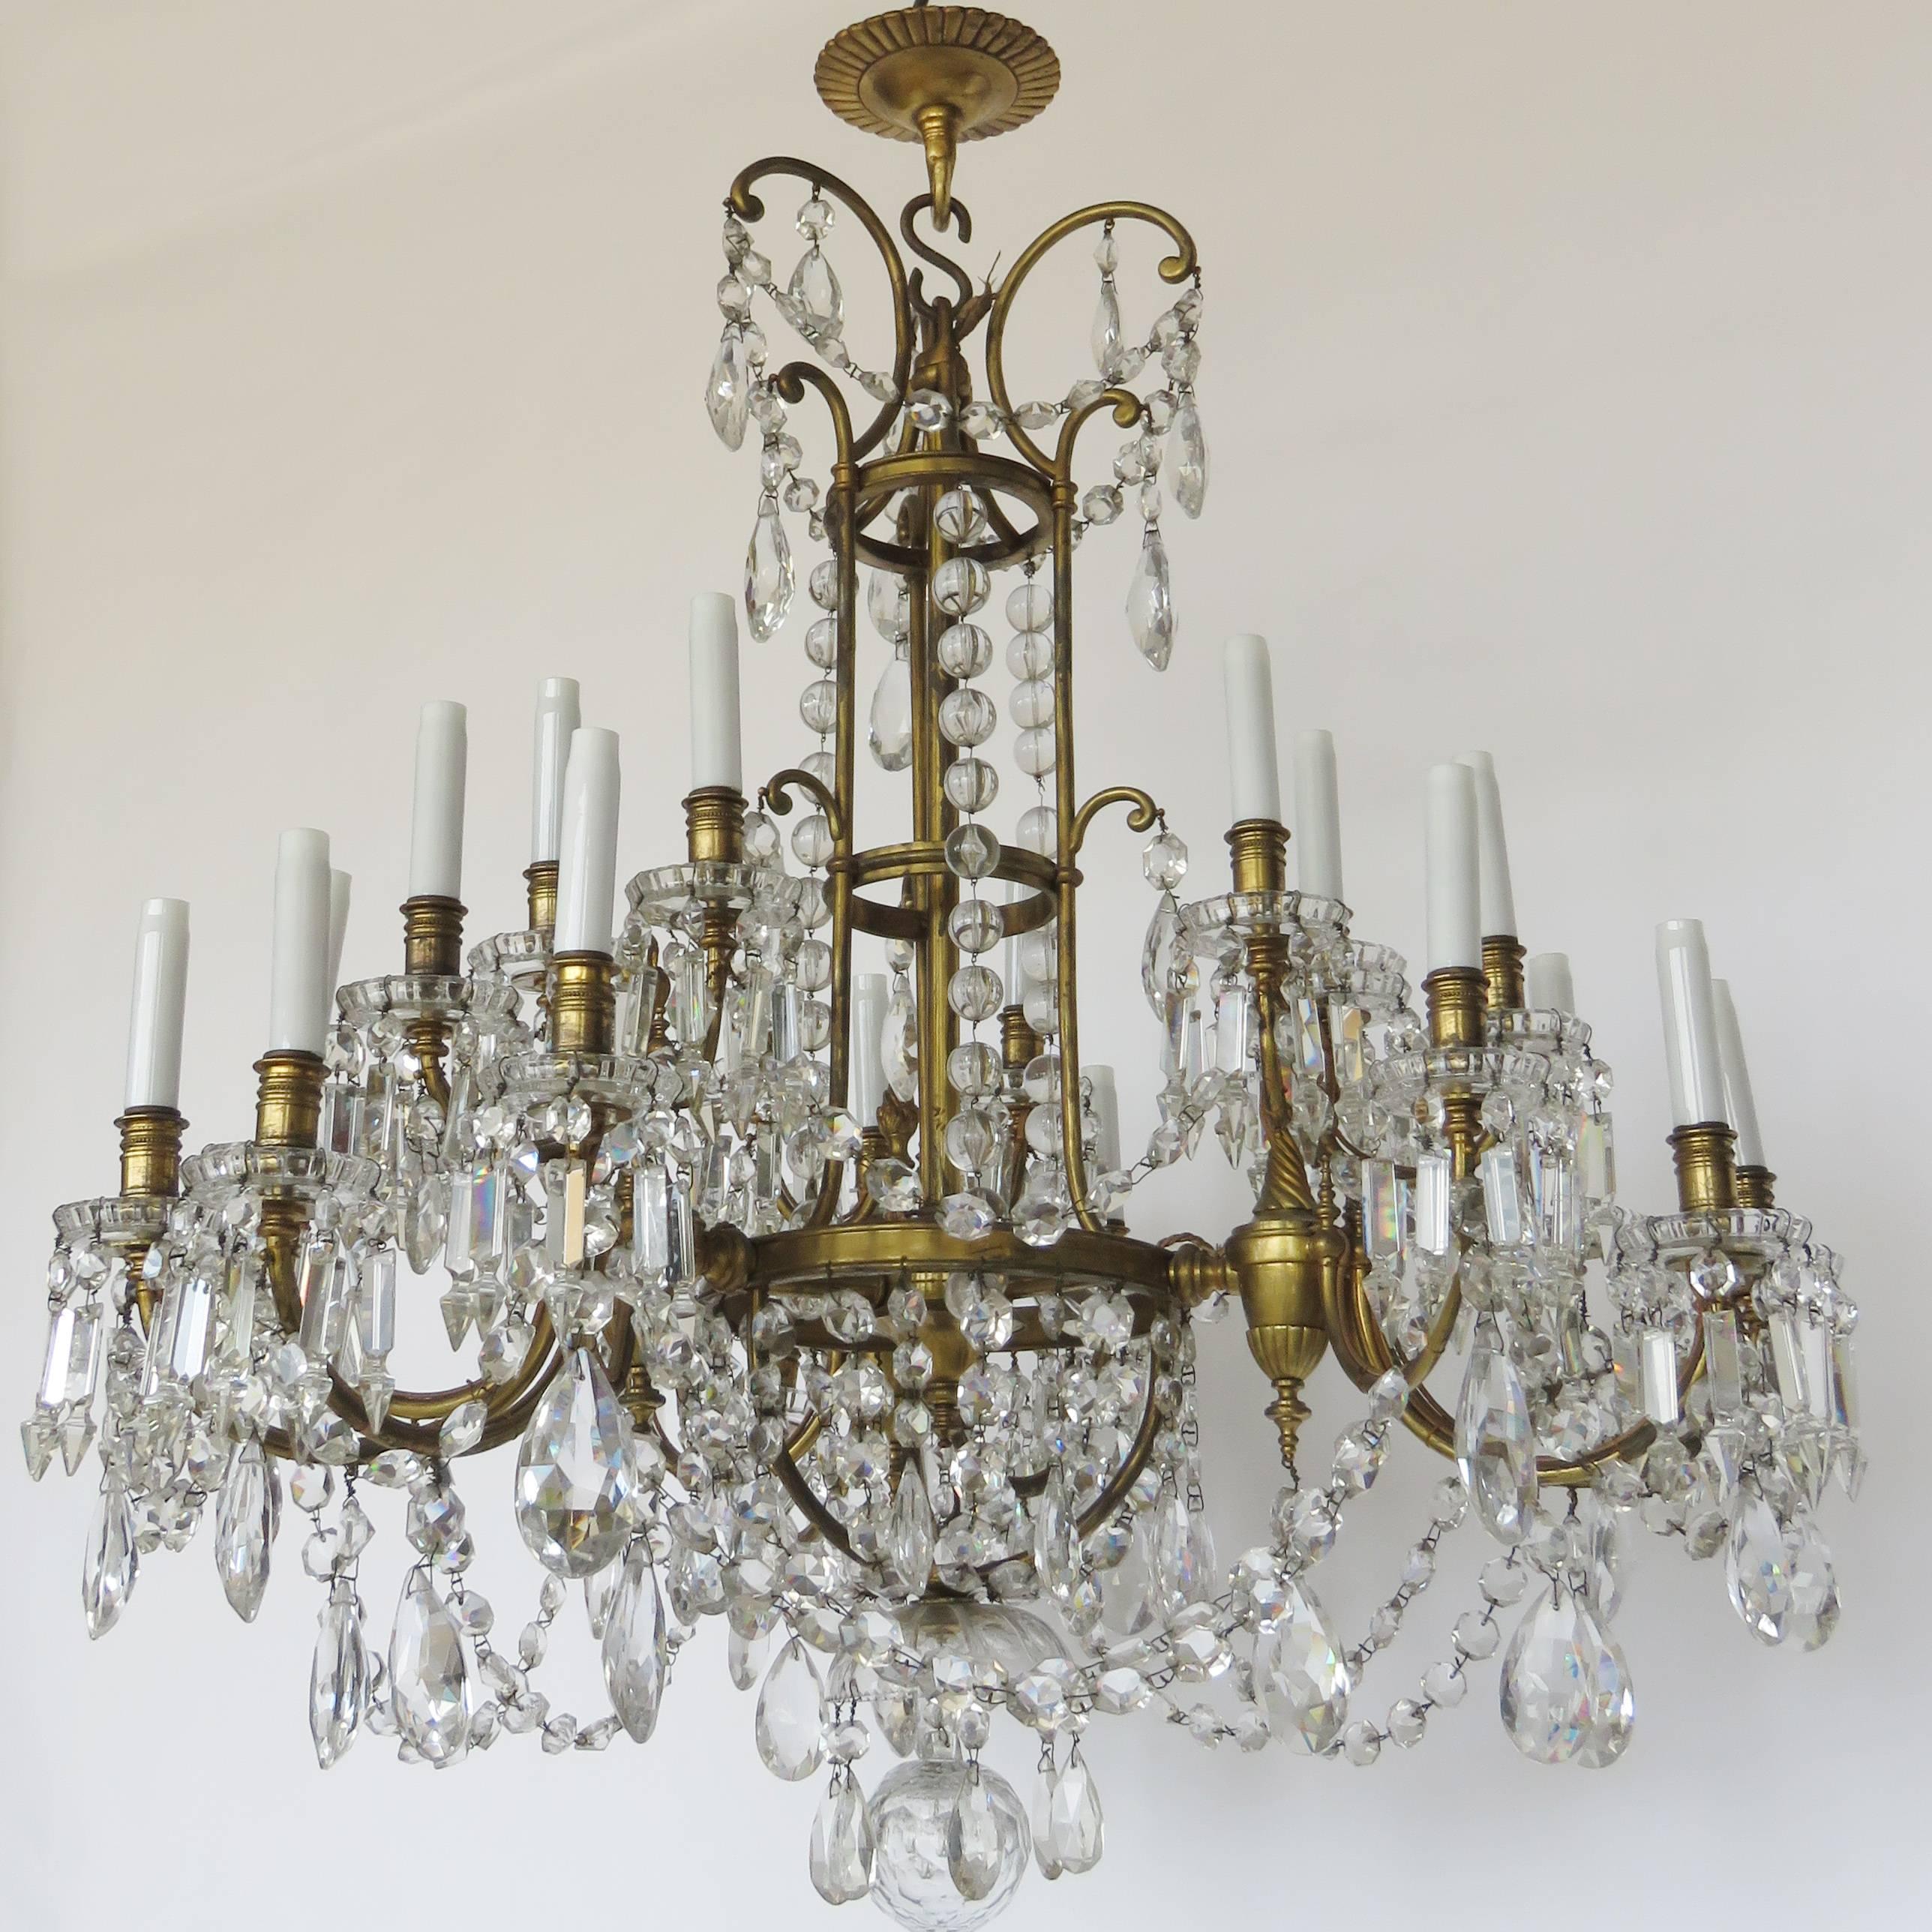 Magnificent bronze chandelier, extensive Baccarat crystal beading and teardrop pendants with 21 candle arm lights.